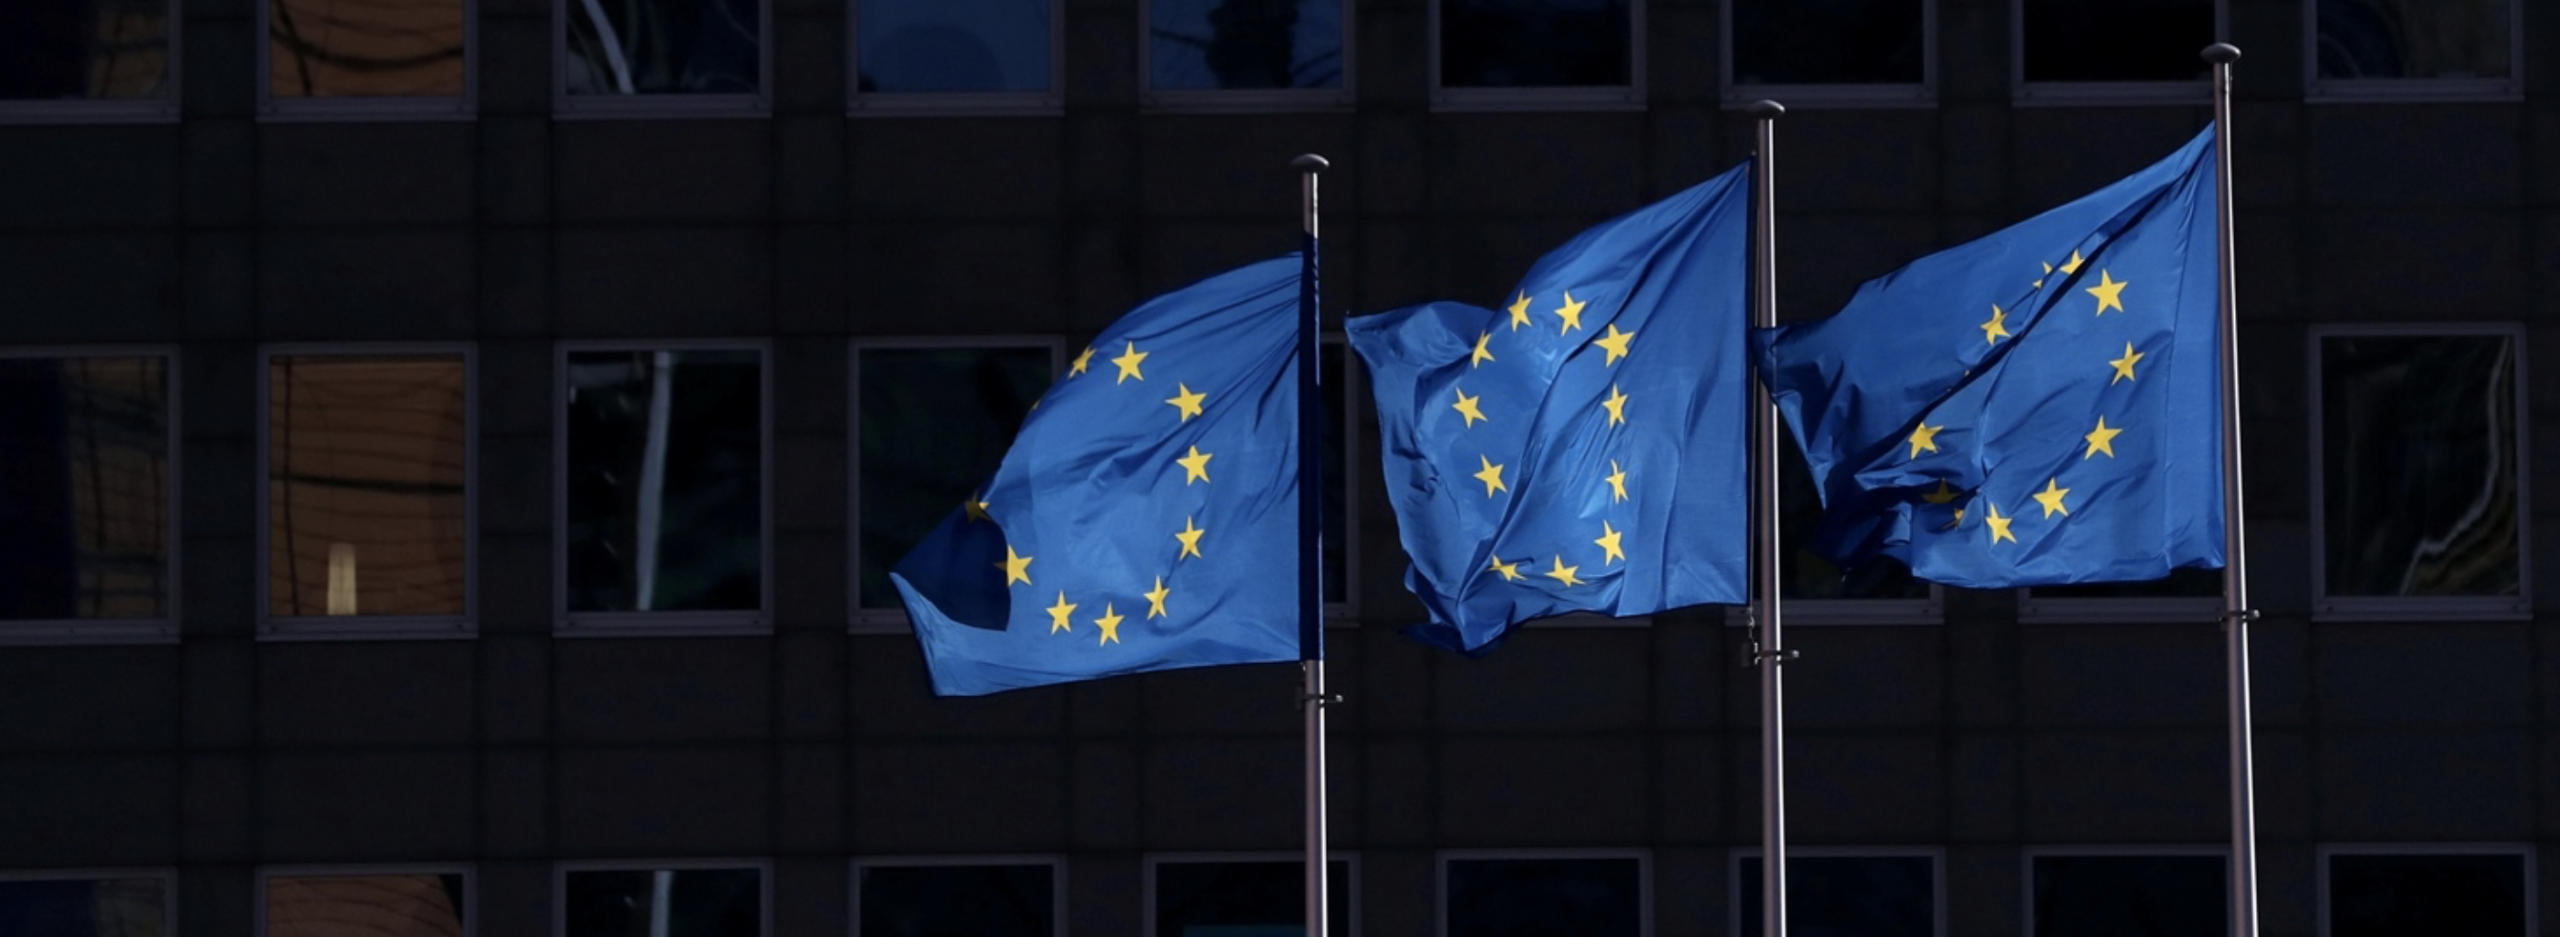 Op-Ed: The European Union’s deficient response to COVID-19 disinformation